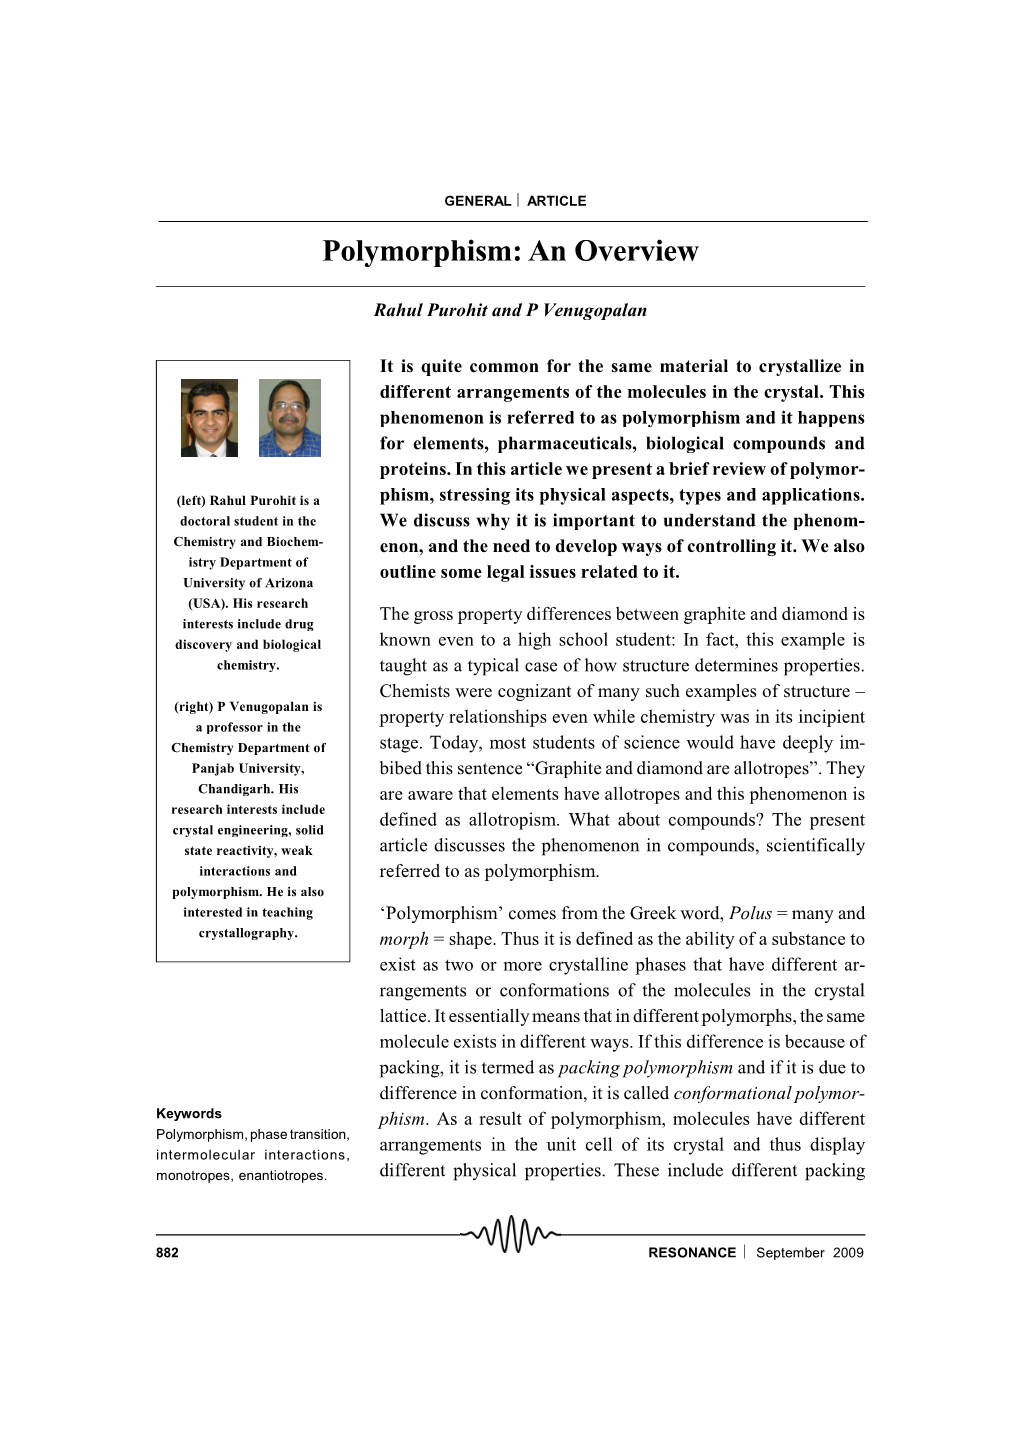 Polymorphism: an Overview